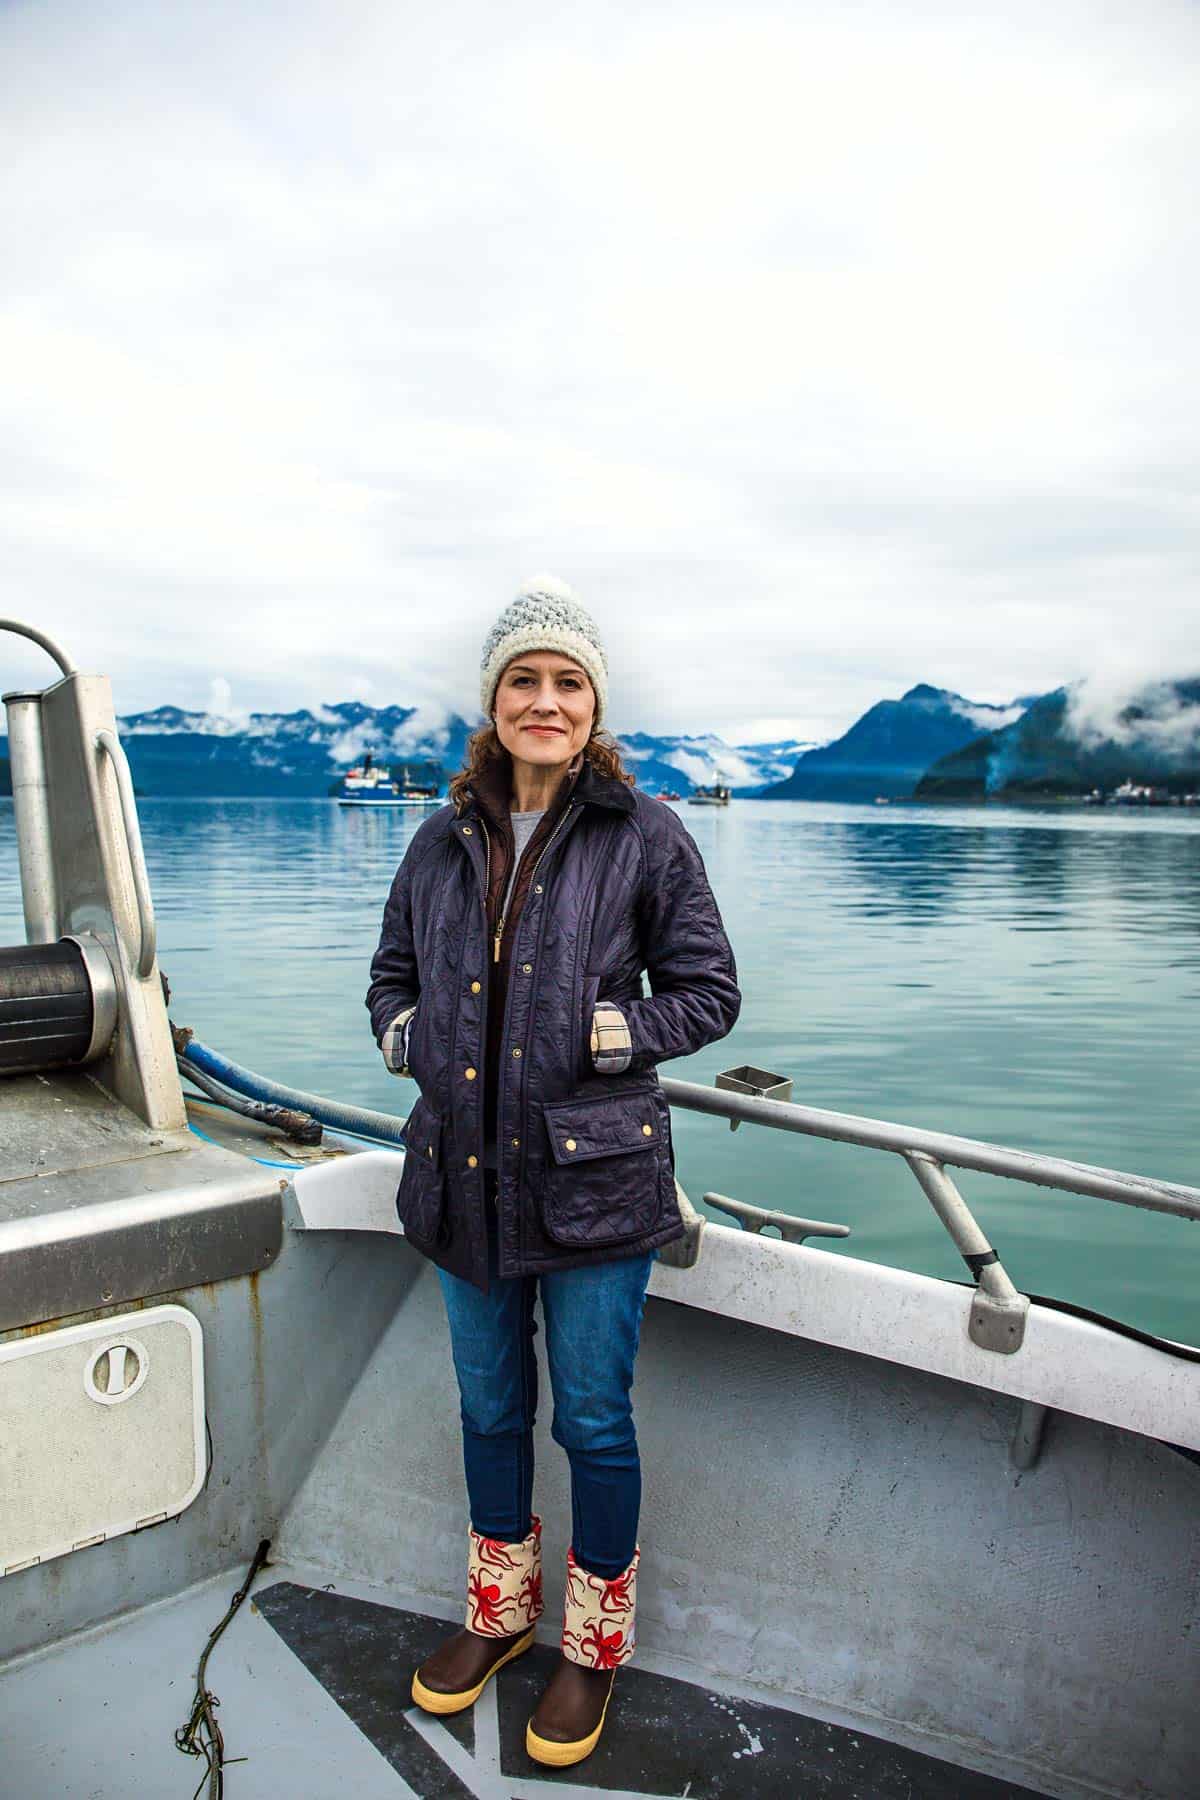 Aysegul Sanford on a boat in Alaska with mountains in the background